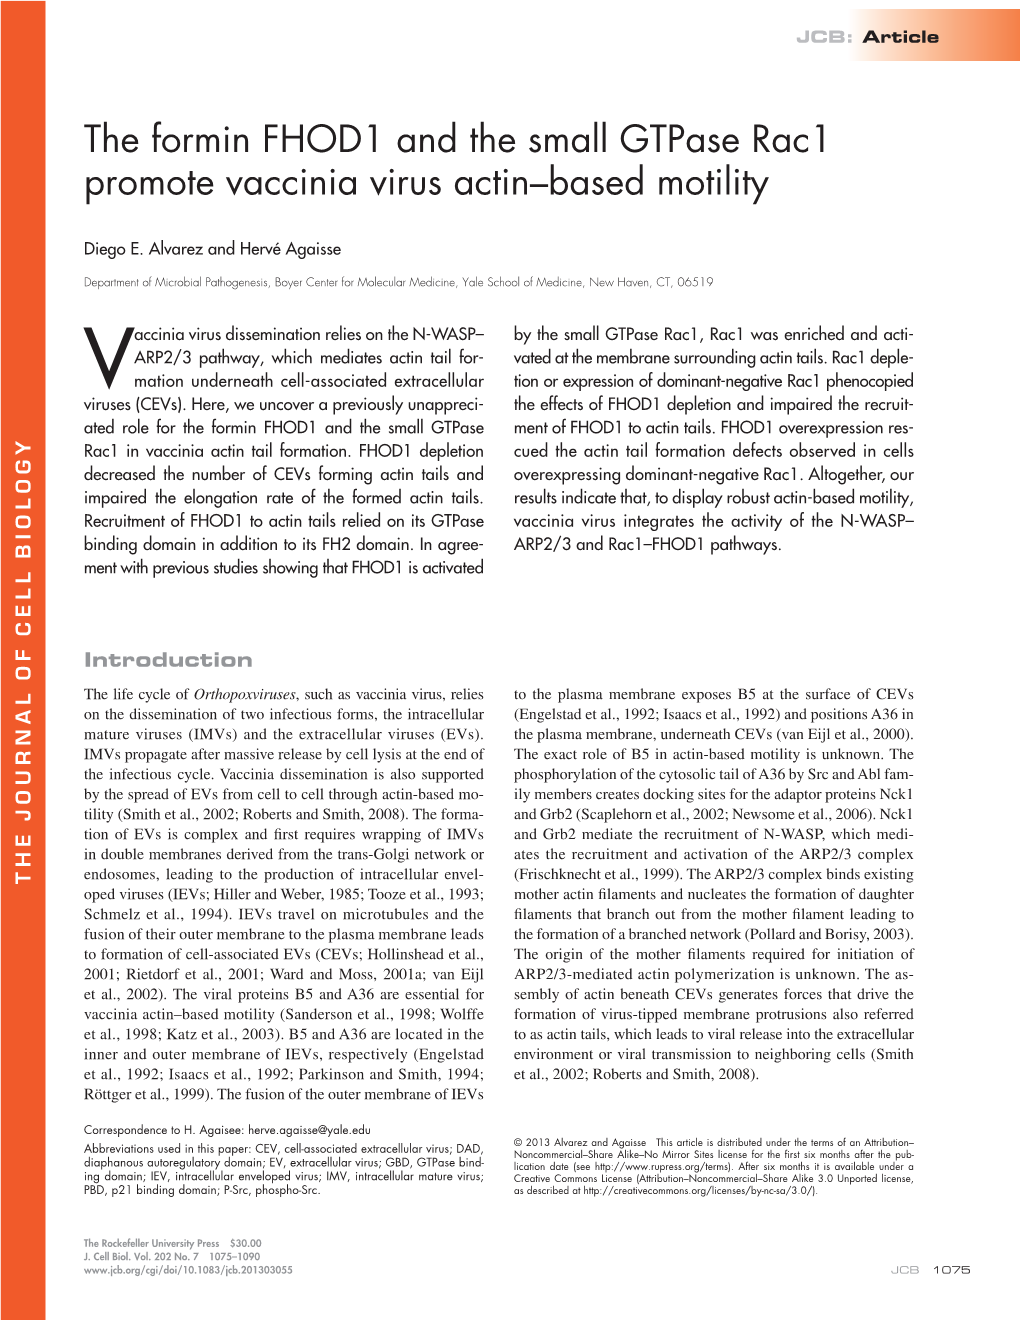 The Formin FHOD1 and the Small Gtpase Rac1 Promote Vaccinia Virus Actin–Based Motility